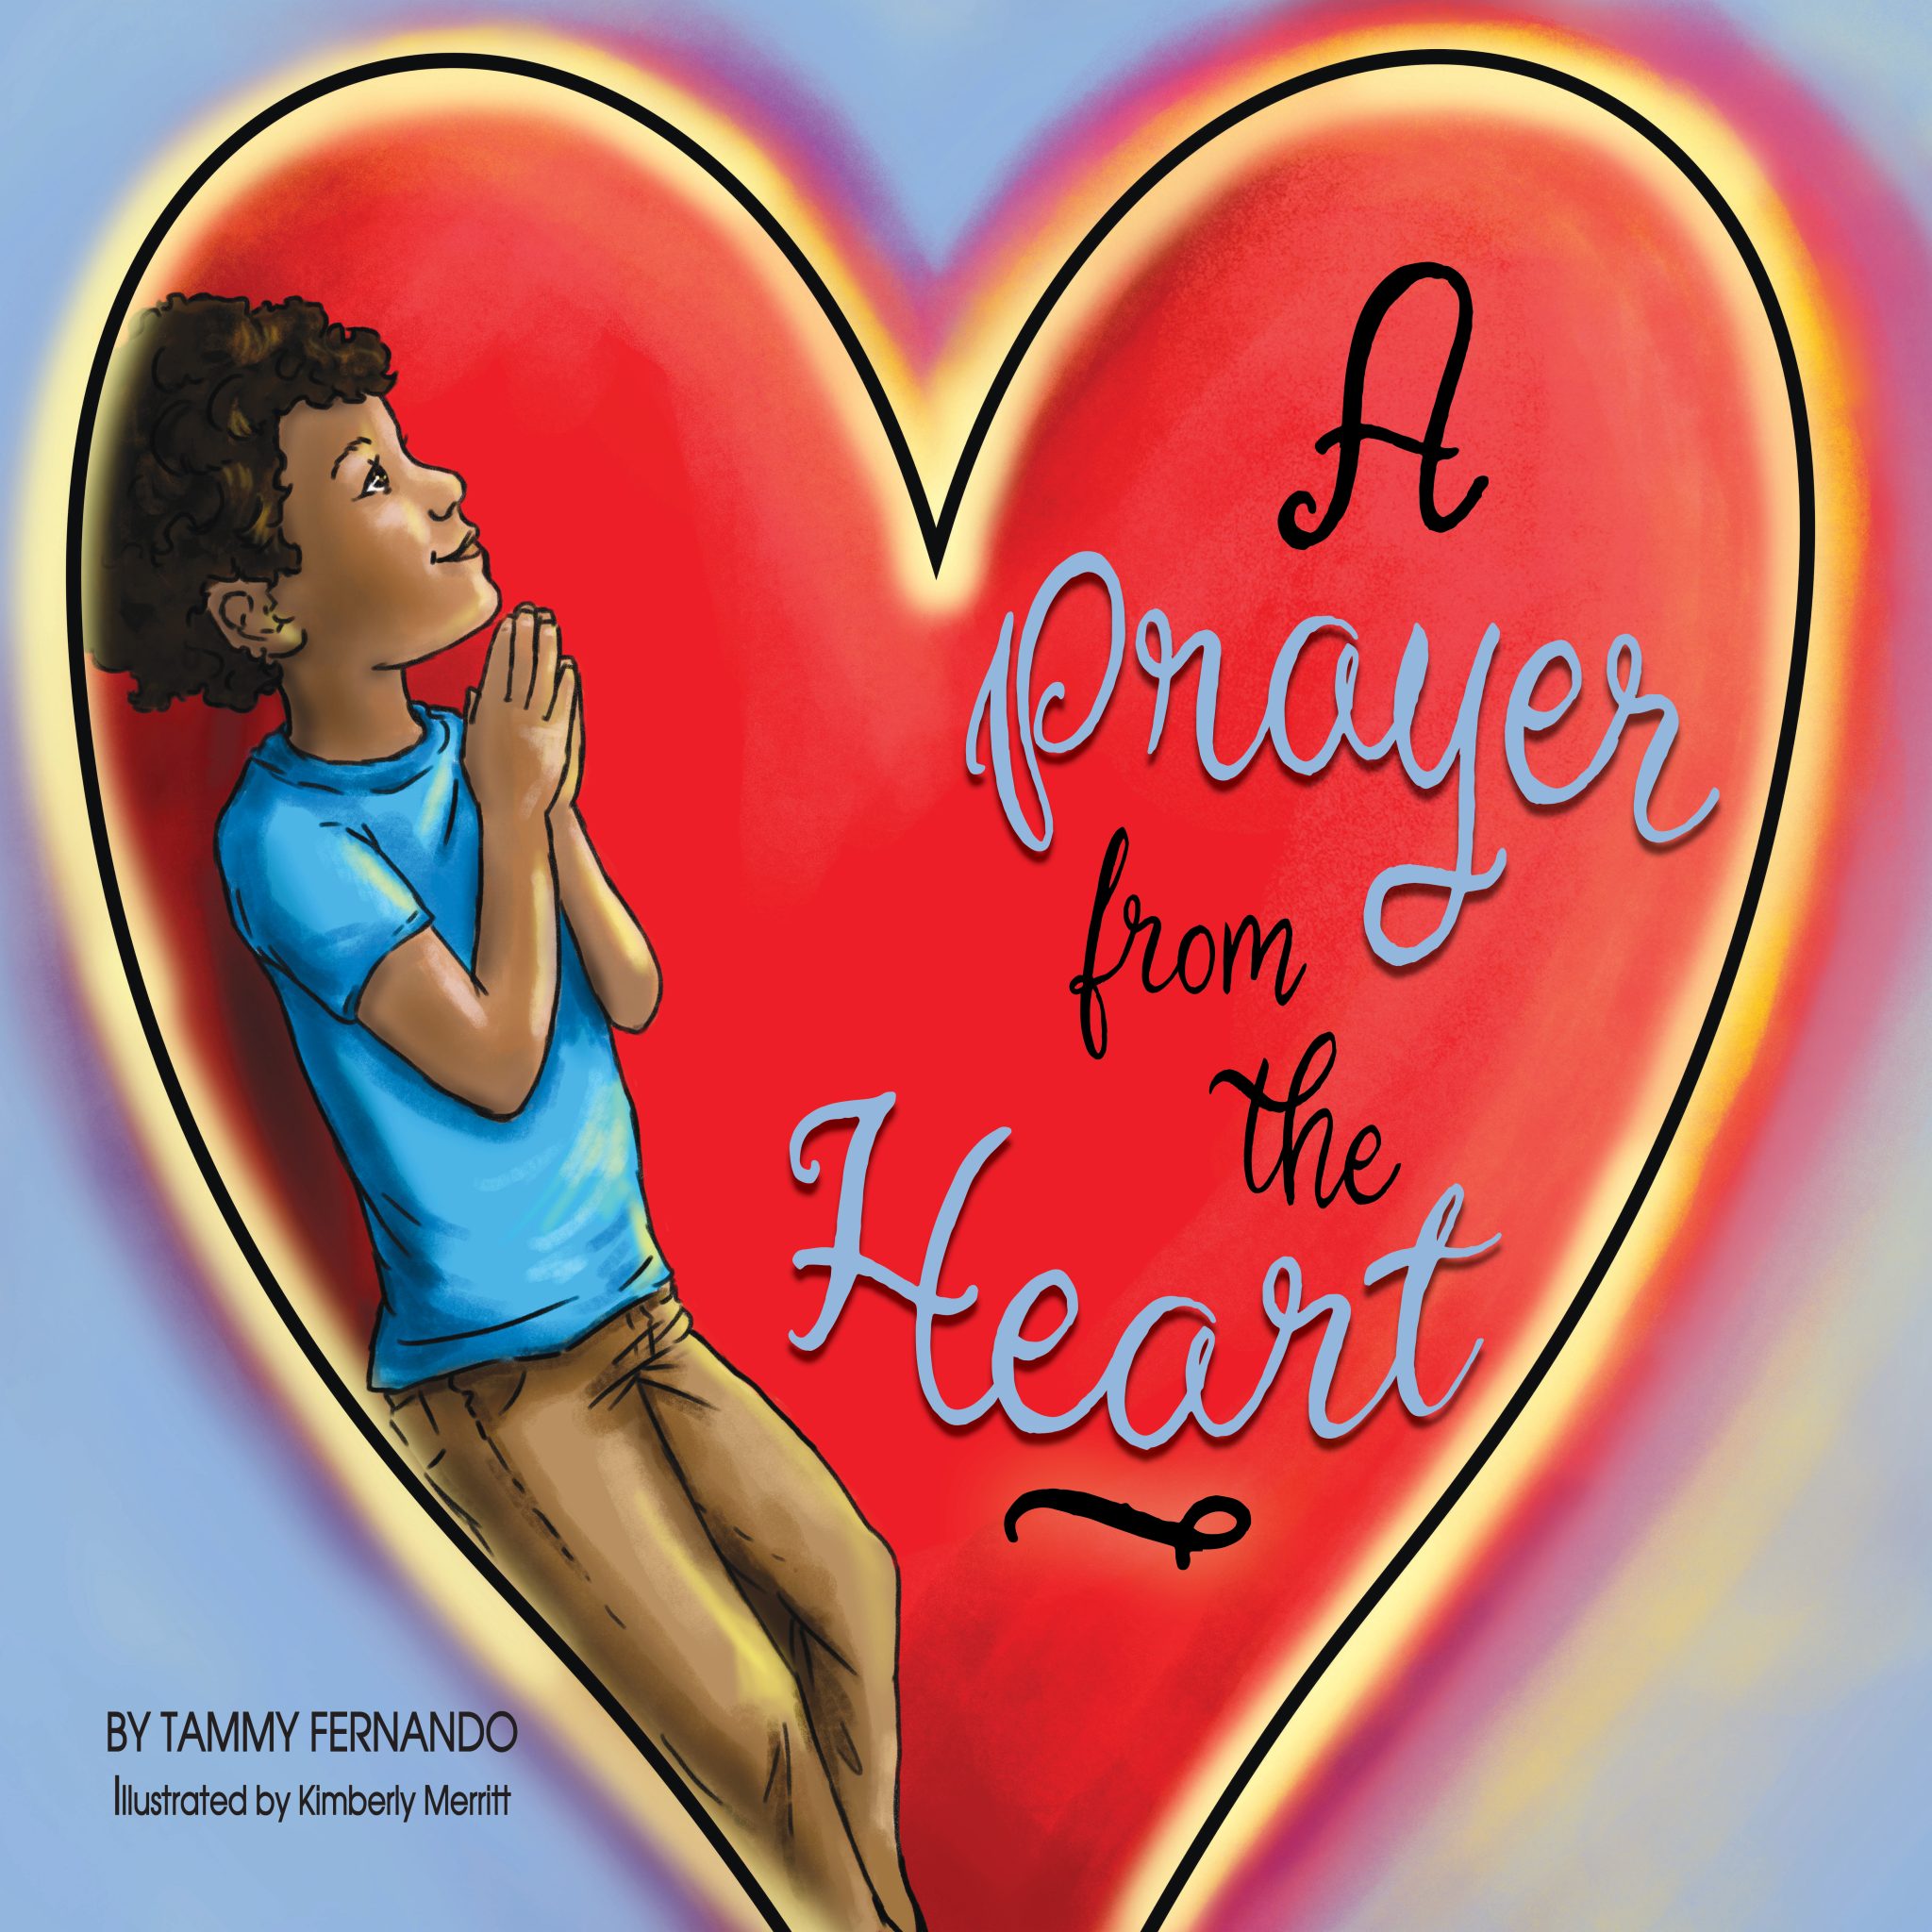 20230417 ALauer A Prayer From the Heart book cover